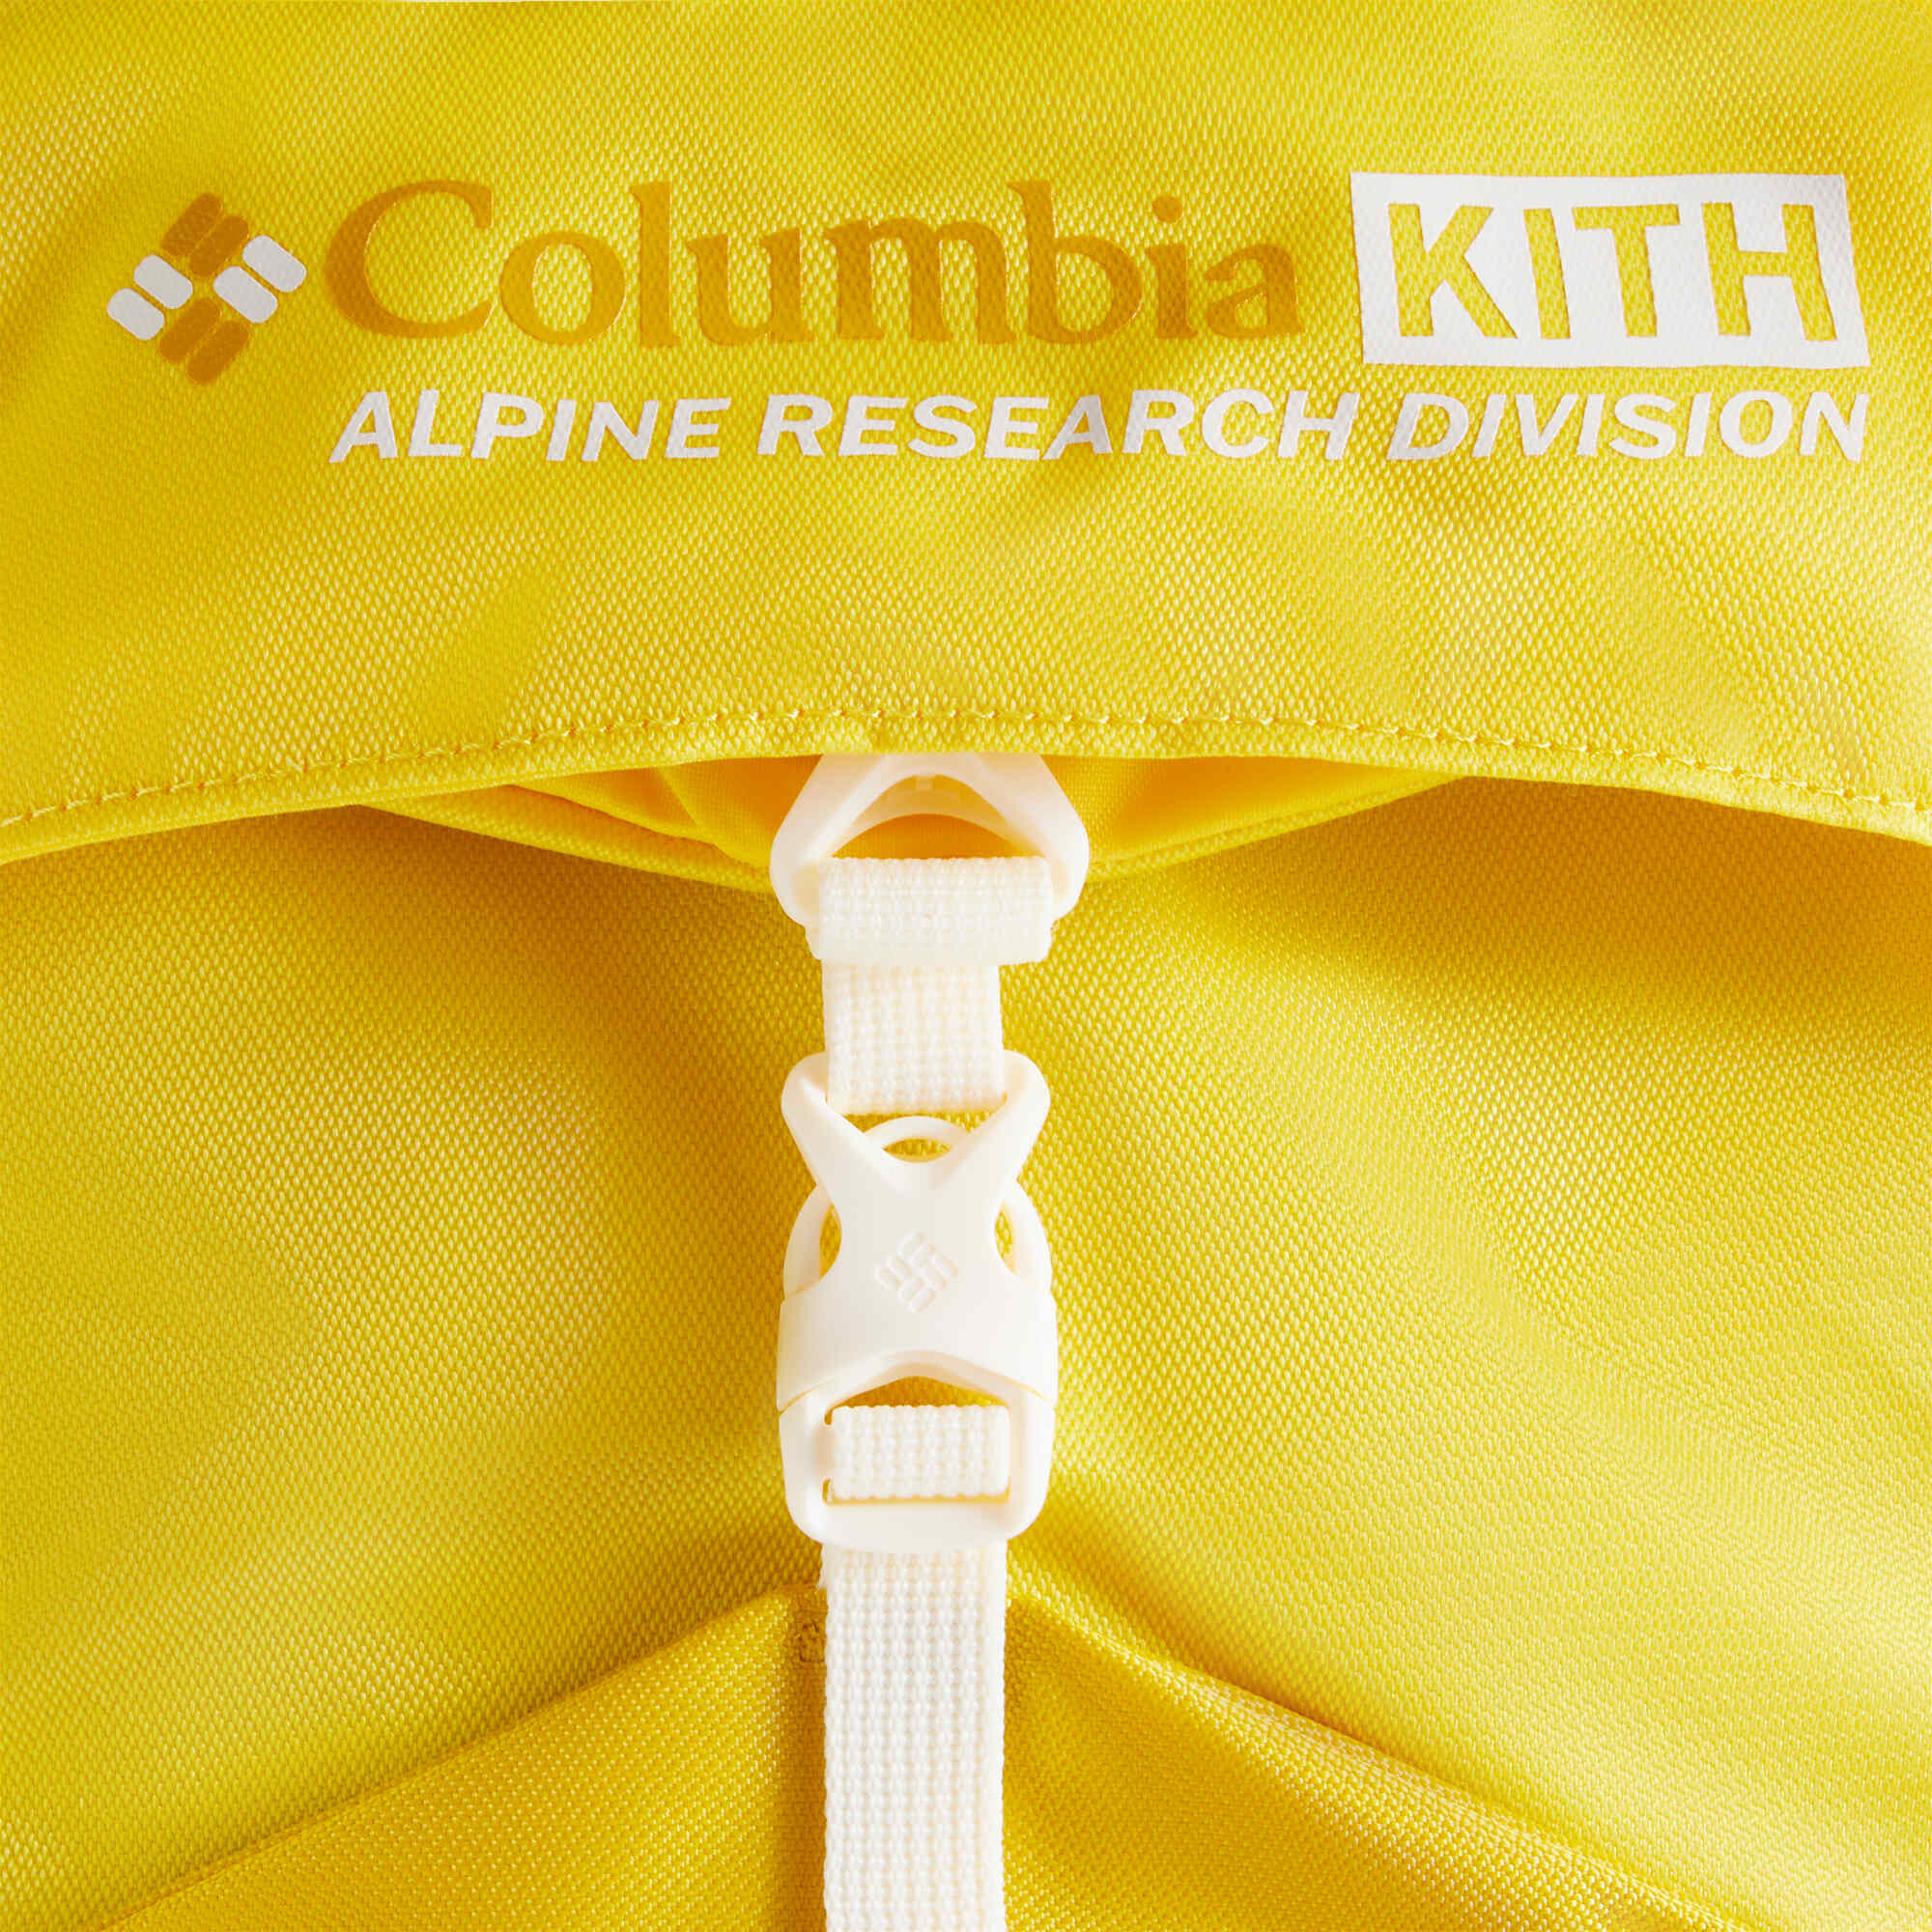 UrlfreezeShops for Columbia 37L Backpack - Bright Yellow